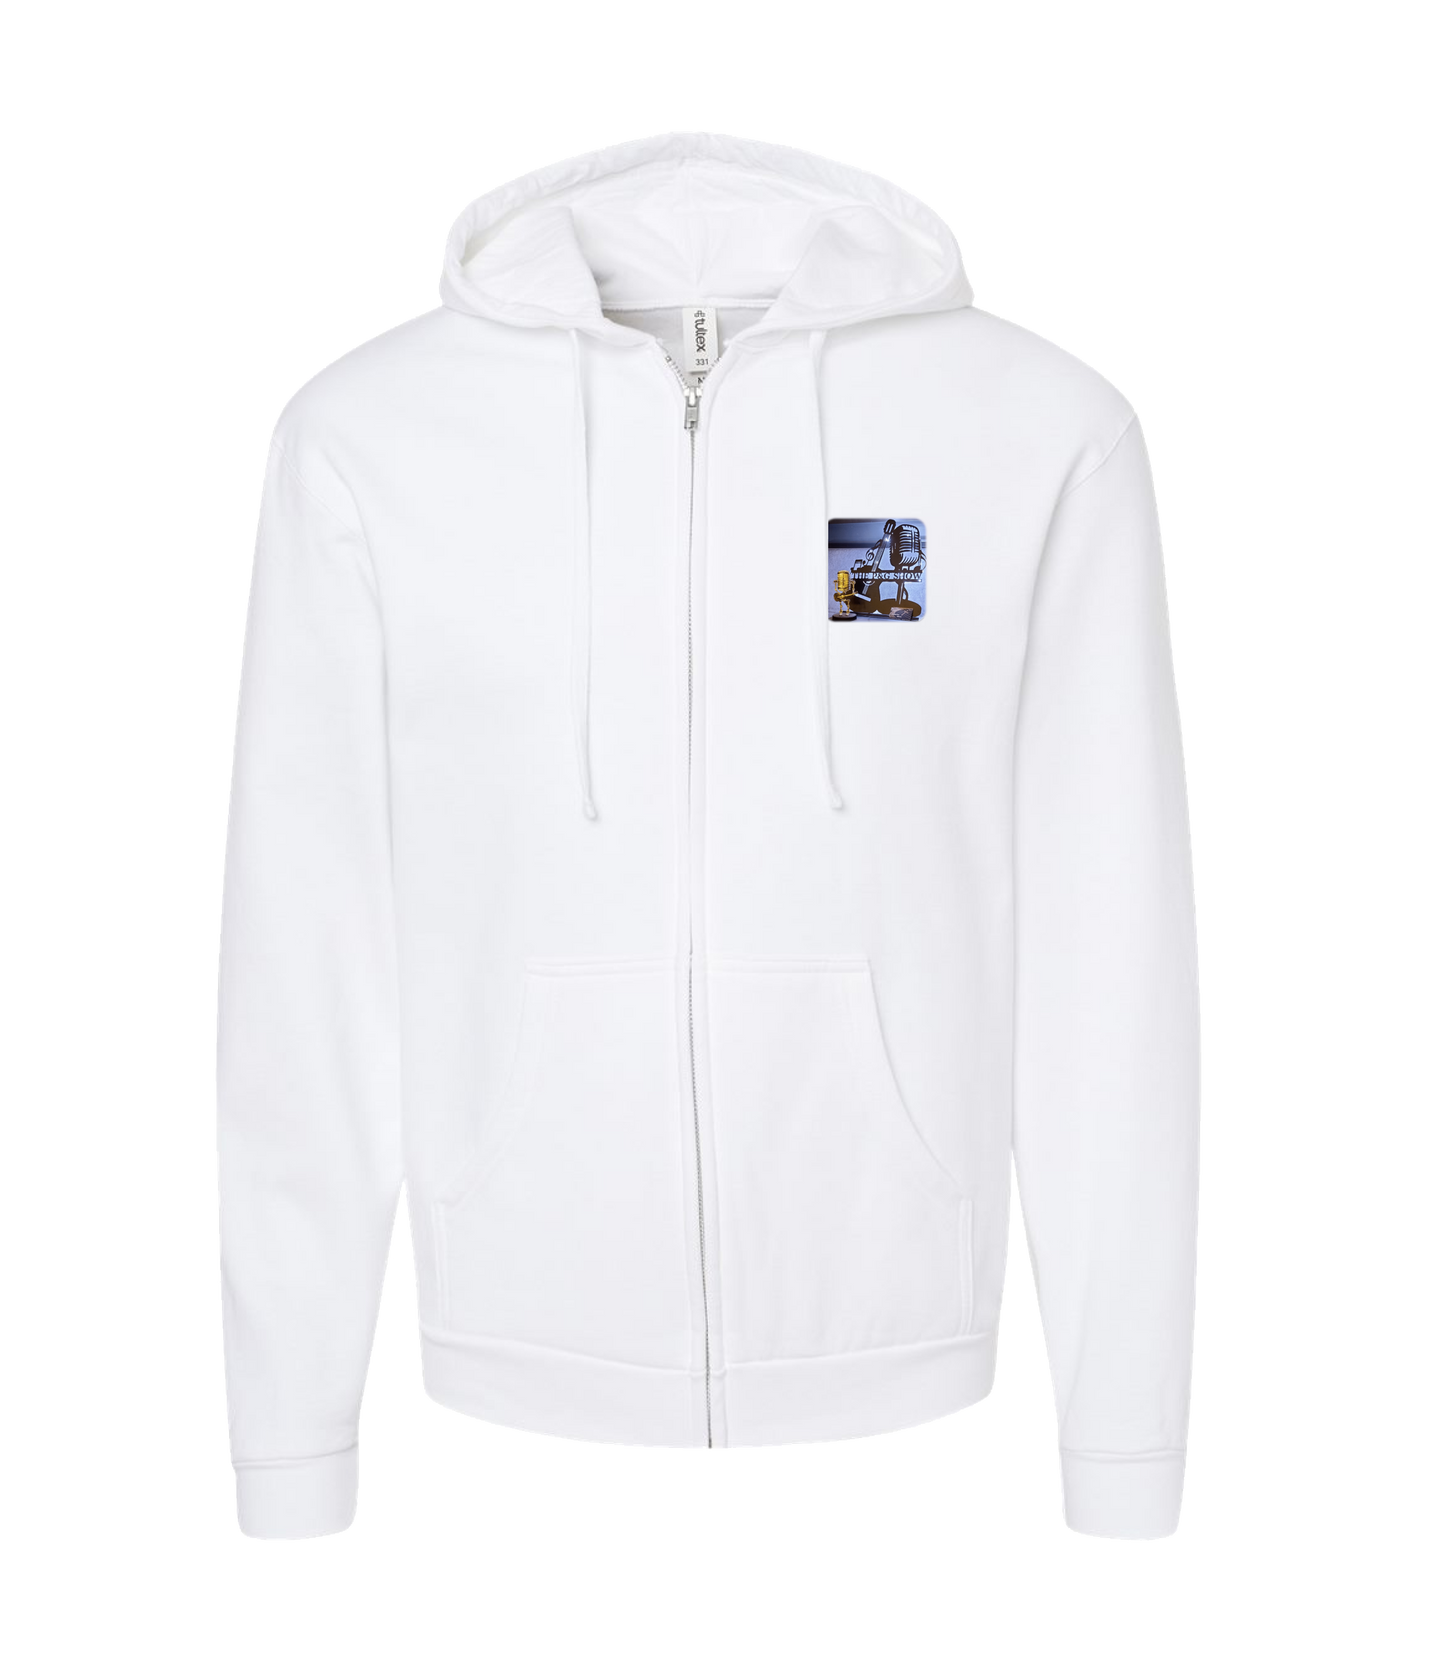 The Pope and Guitarlos Show - Mic Guitar - White Zip Up Hoodie